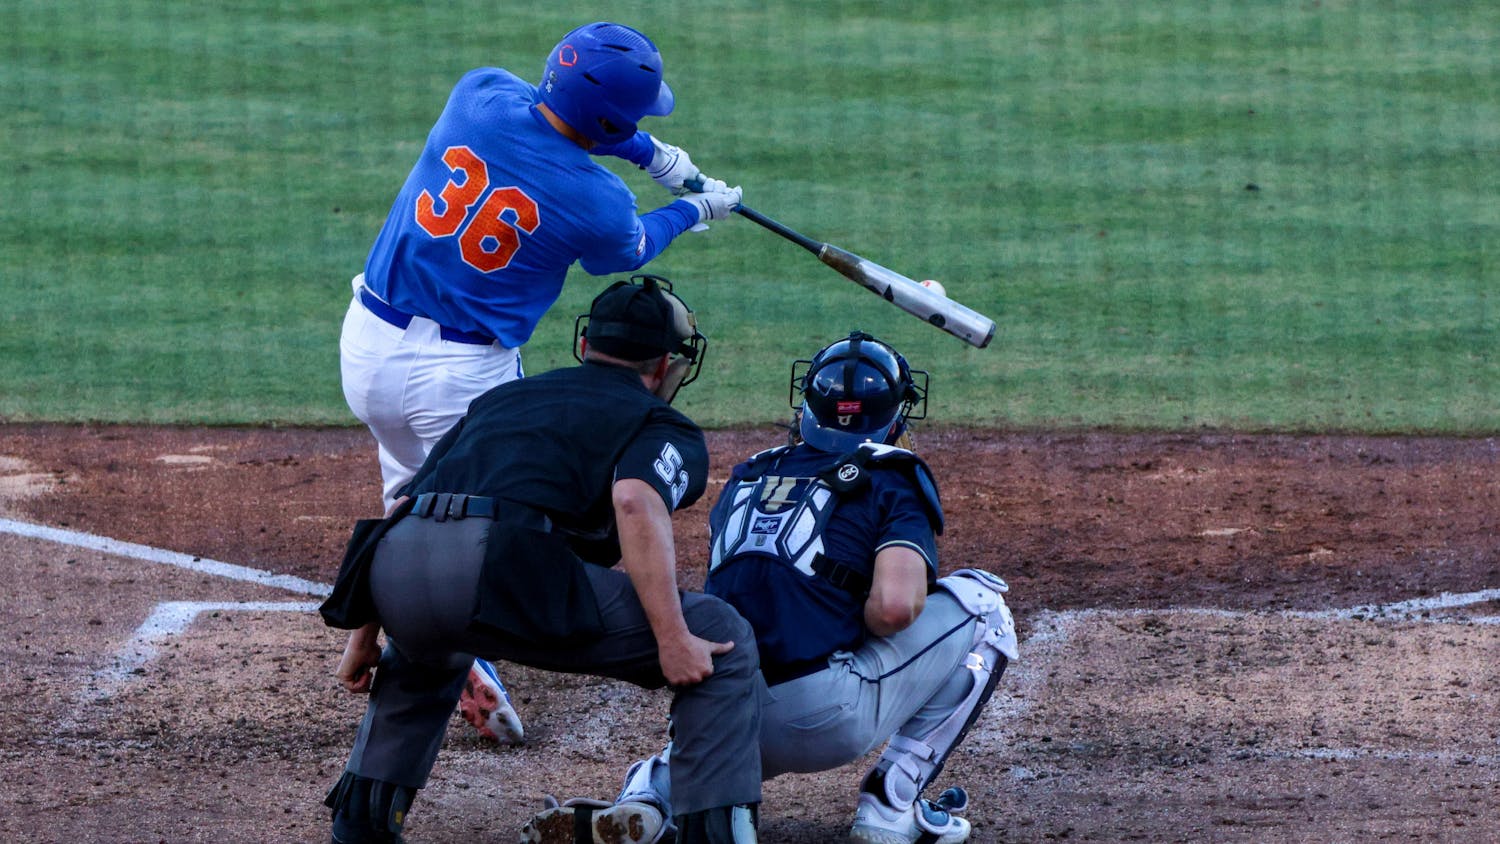 Florida left fielder Wyatt Langford hits the ball in the Gators' 16-2 win against the Charleston Southern Buccaneers Saturday, Feb. 18